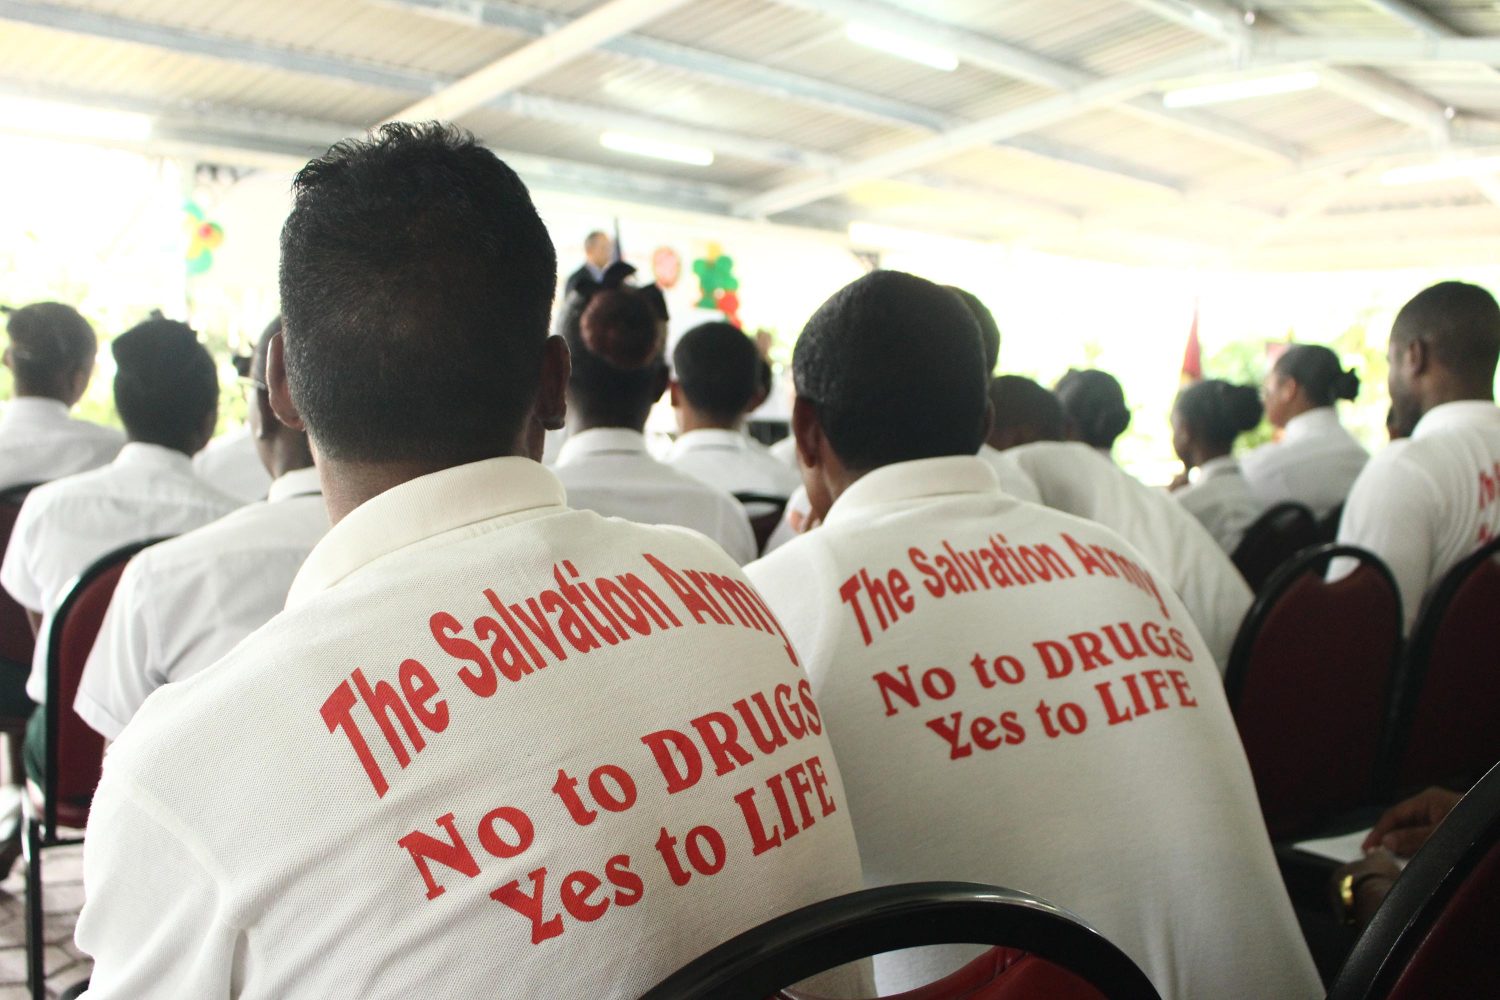 Youths from the Salvation Army Drug Rehabilitation Centre at the Georgetown Club yesterday for the annual launch of the Salvation Army’s Christmas Kettle appeal (Keno George photo)